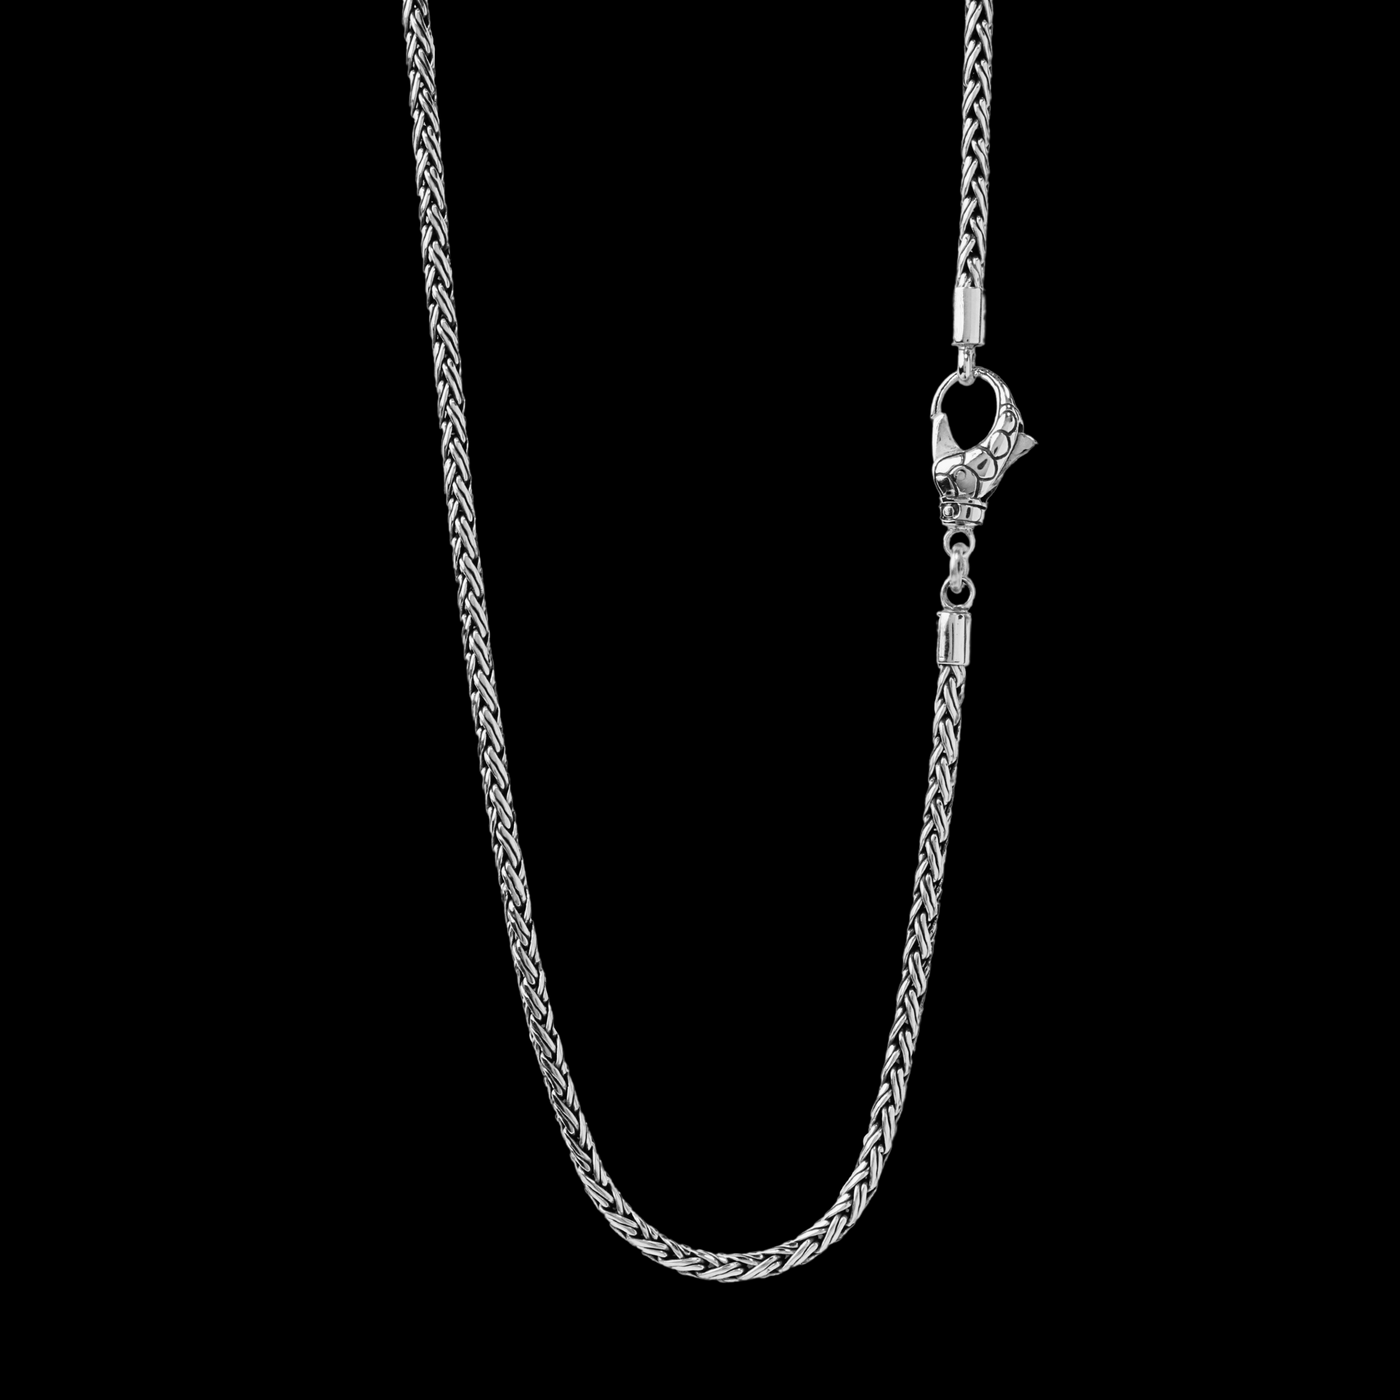 Bali silver necklace (3 mm)